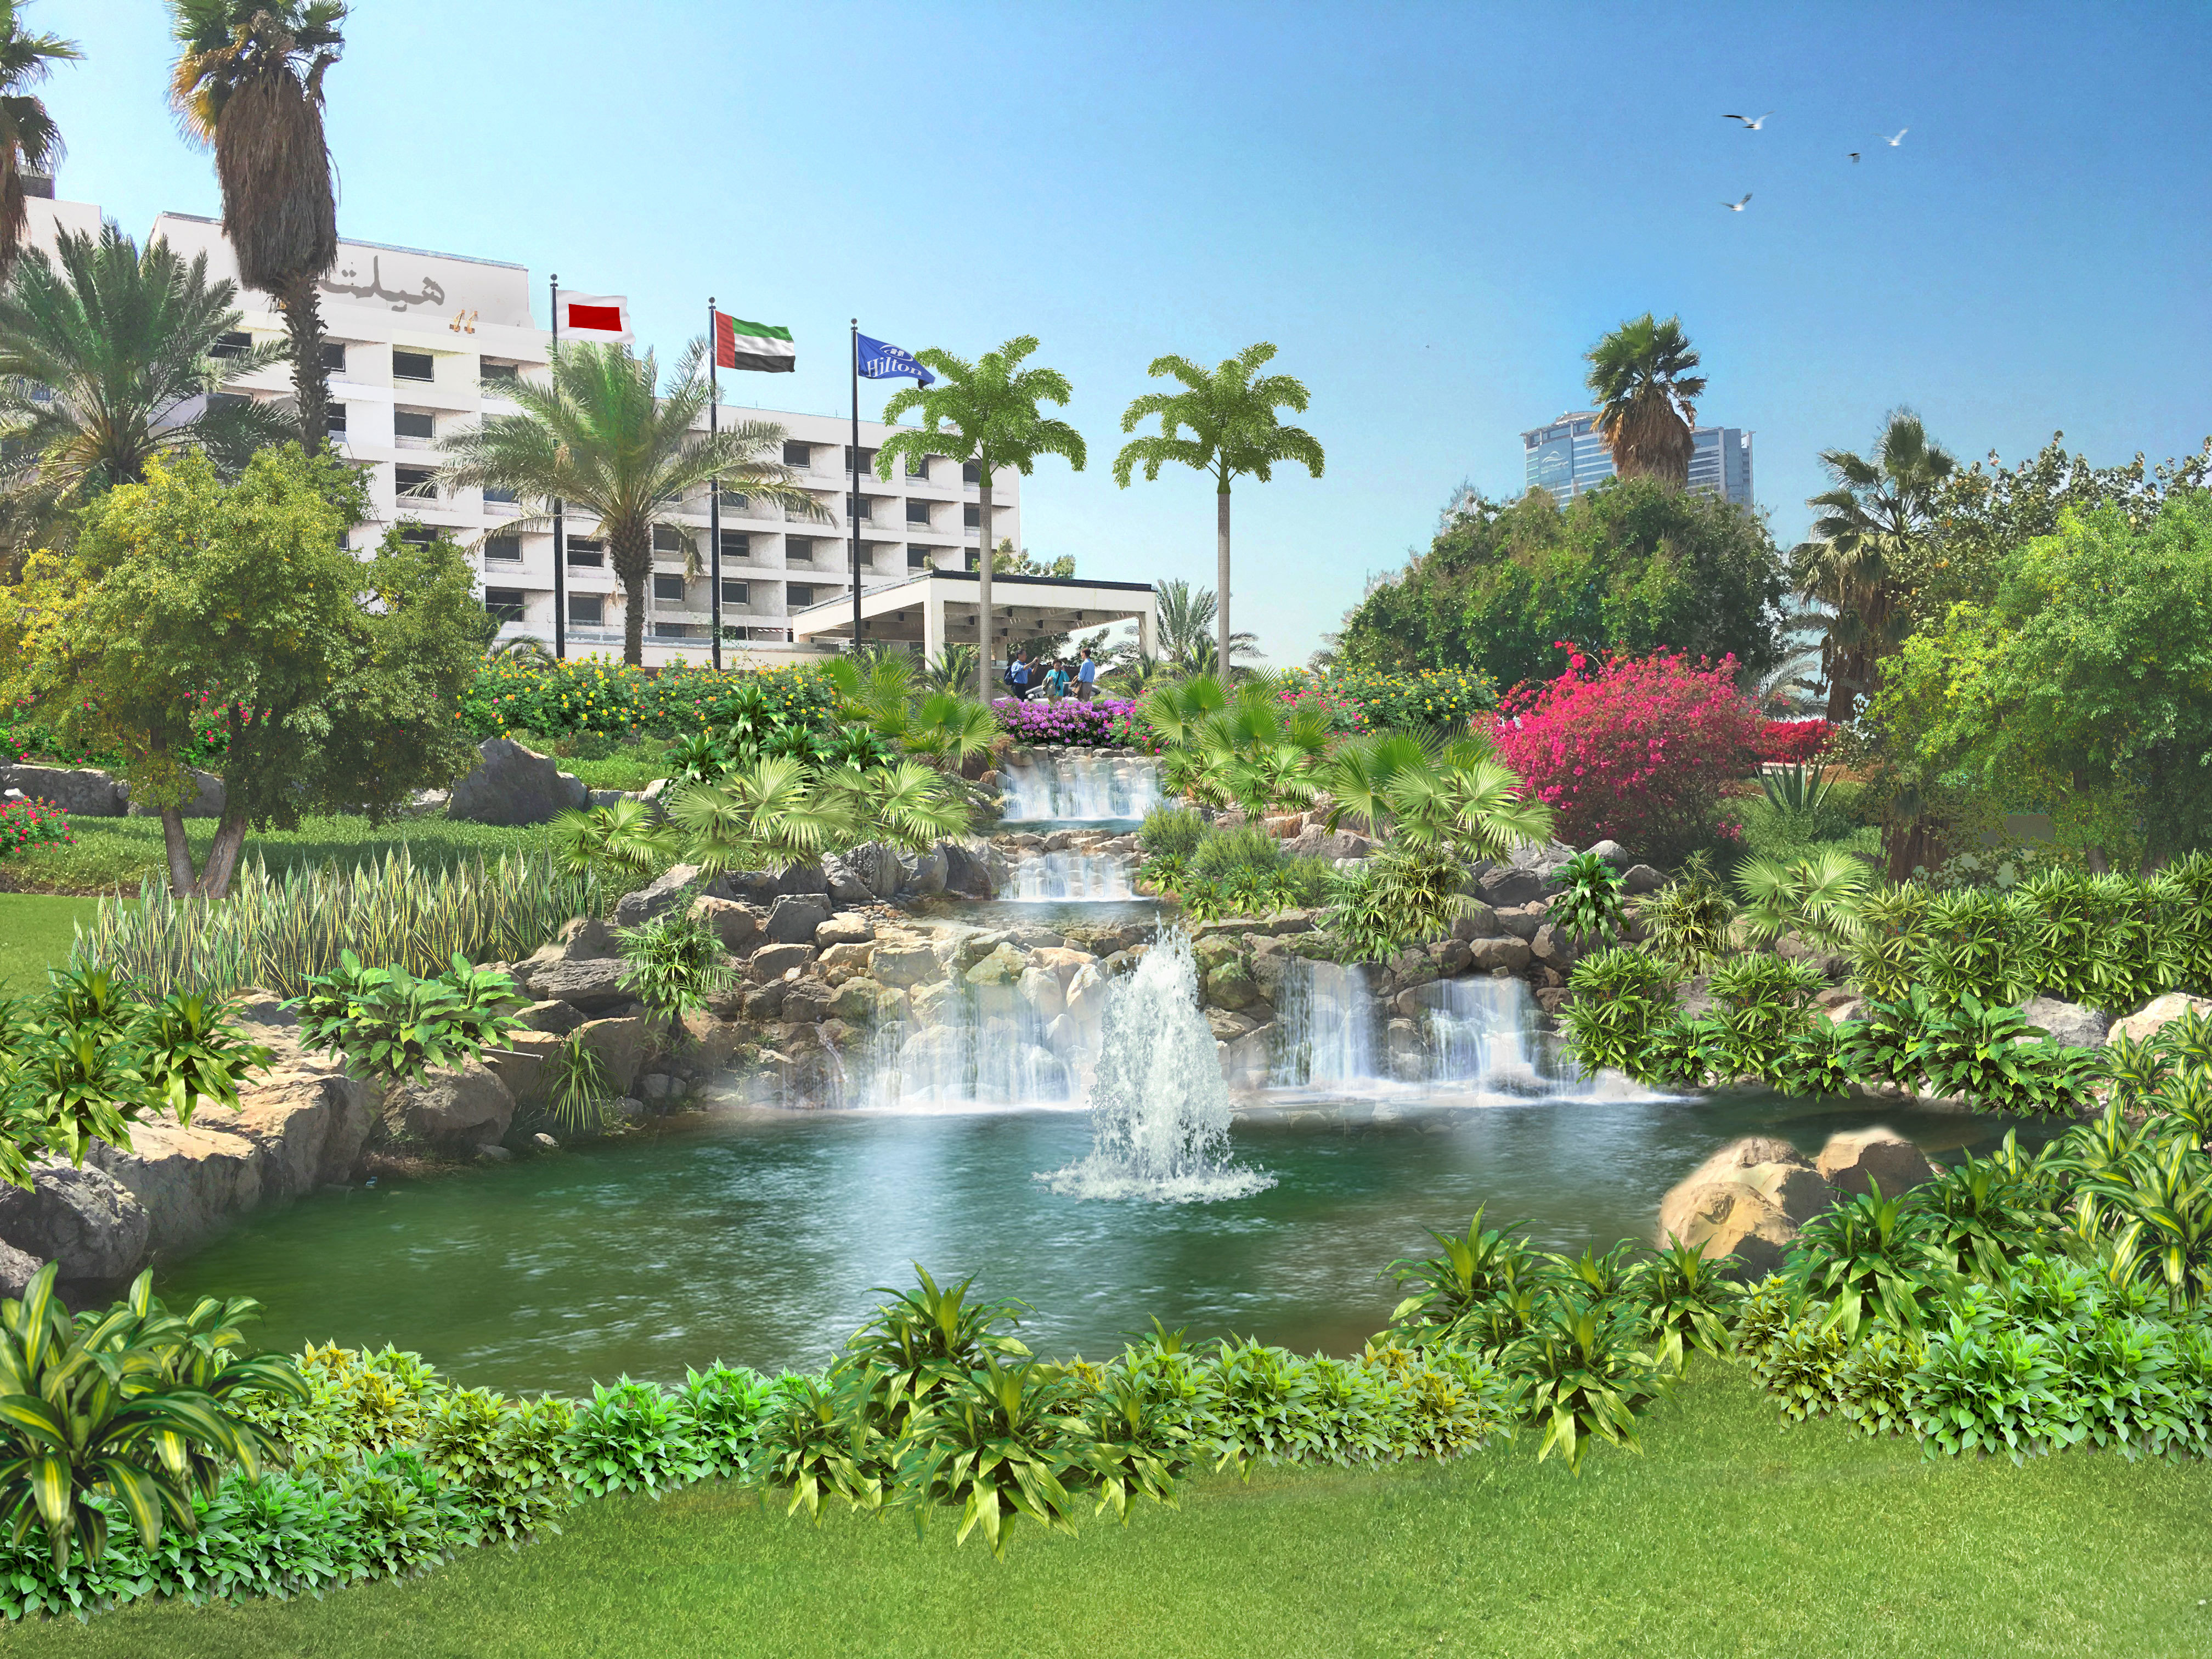 Daytime View of Hotel Exterior, Flag Poles, Fountains, and Garden